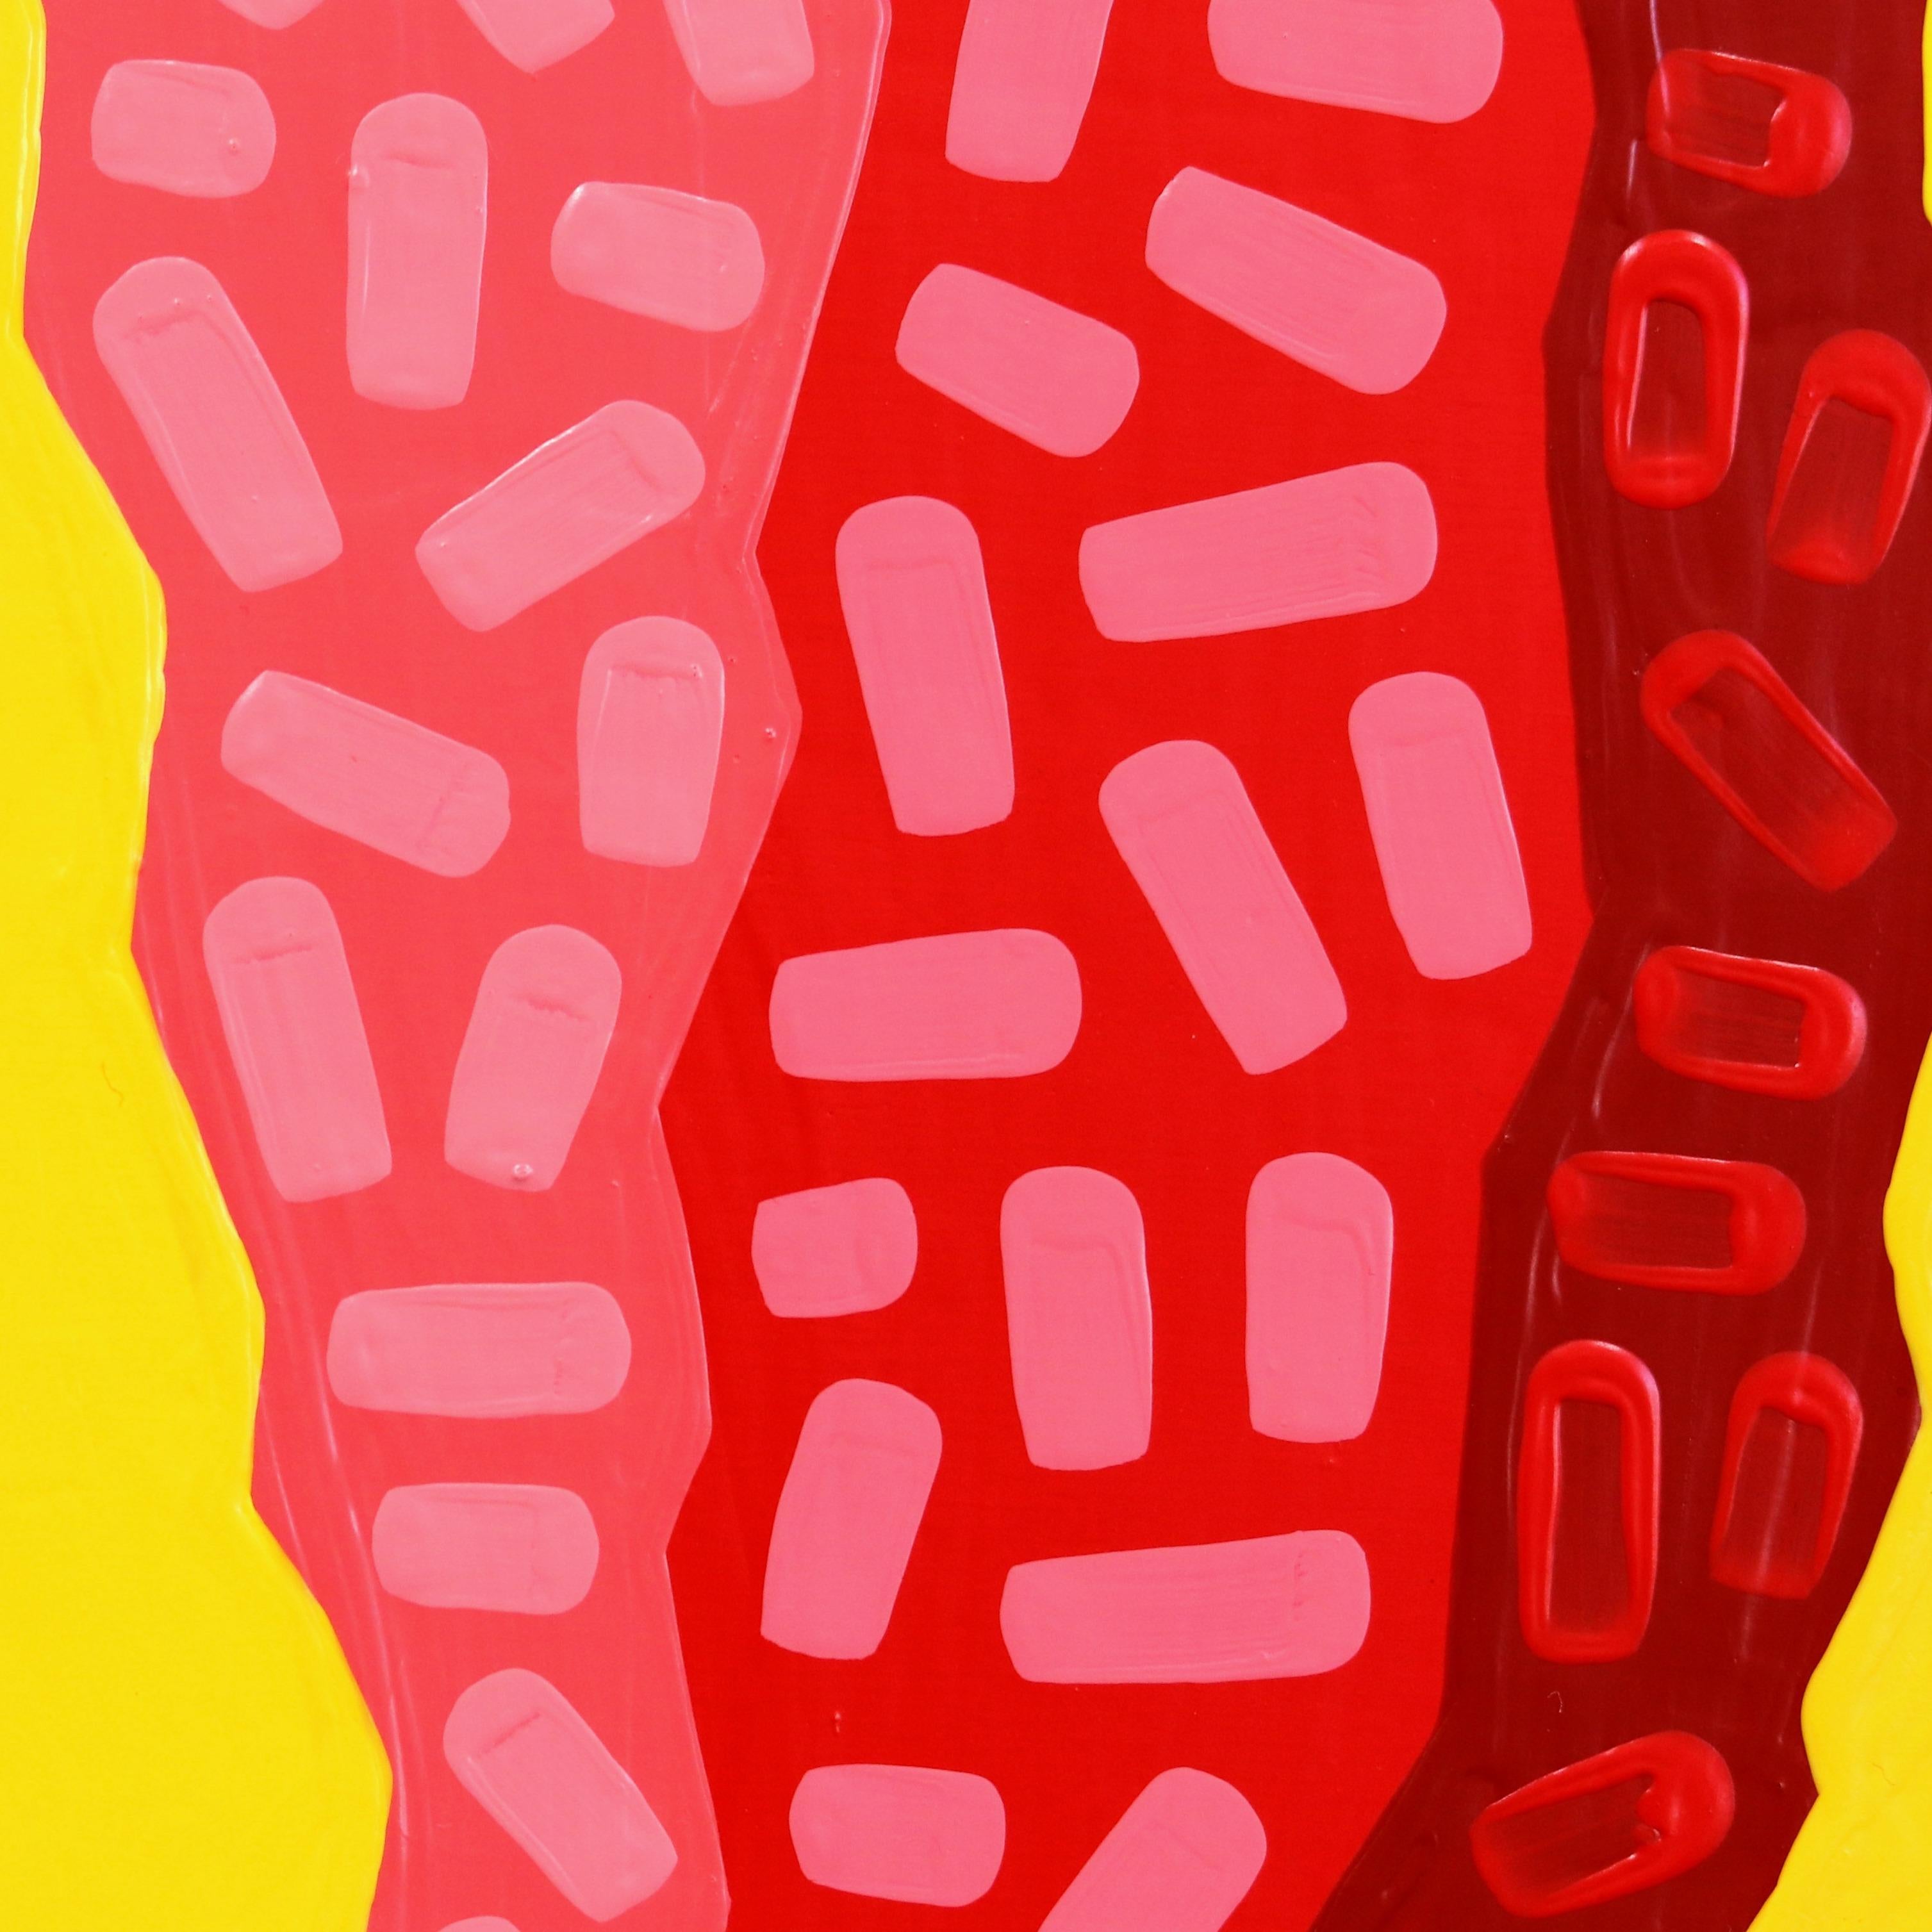 Fresno Amarillo  -  Vibrant Red Yellow Southwest Inspired Pop Art Food Painting For Sale 3